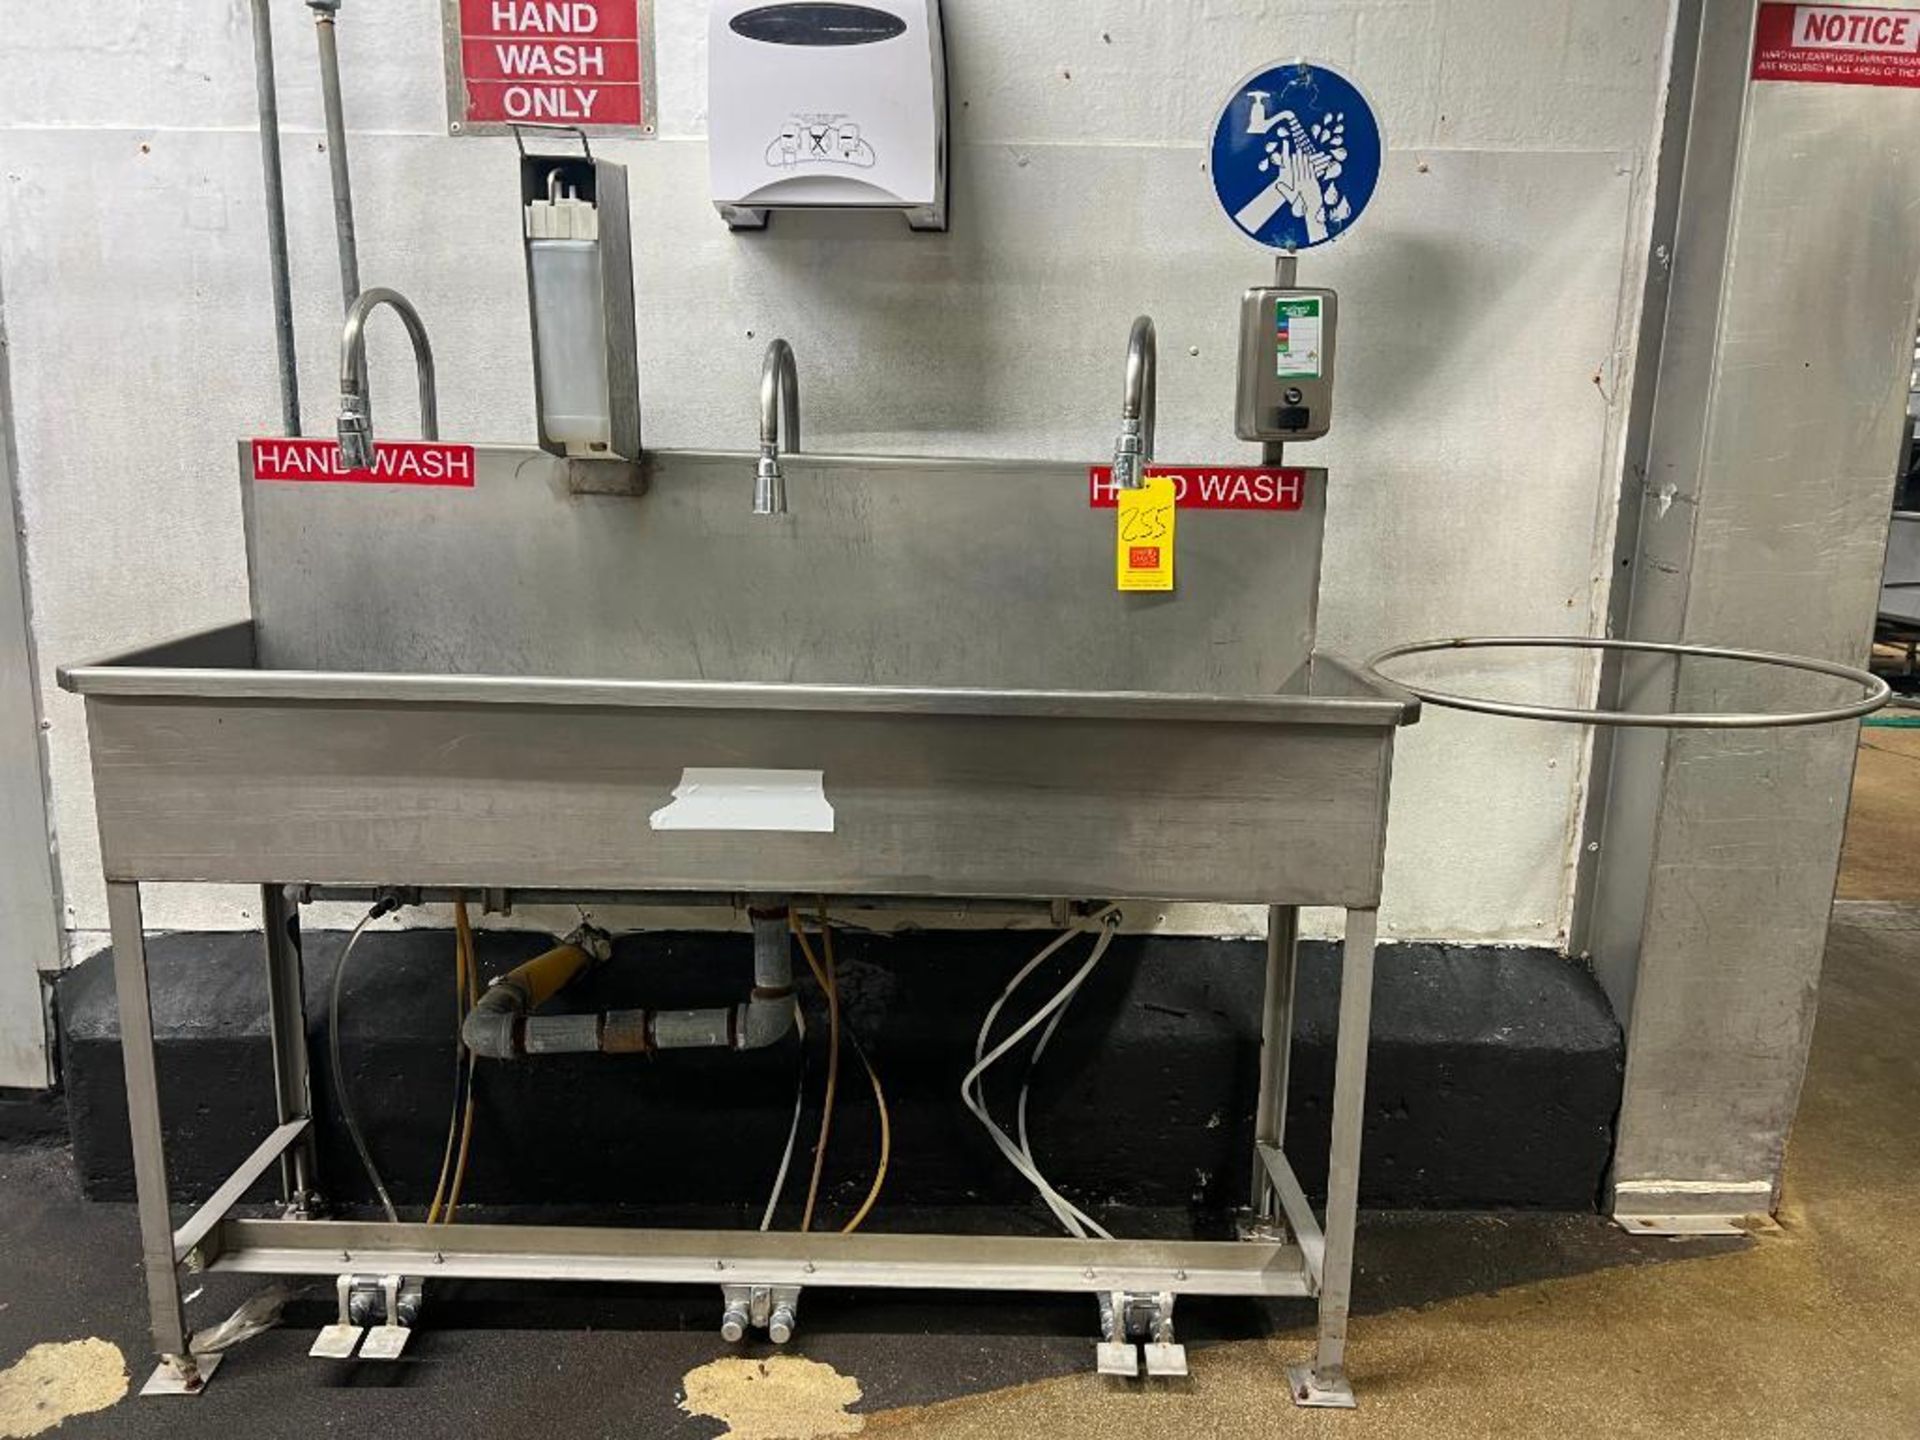 3-Faucet S/S Head Sink with Foot Controls - Rigging Fee: $200